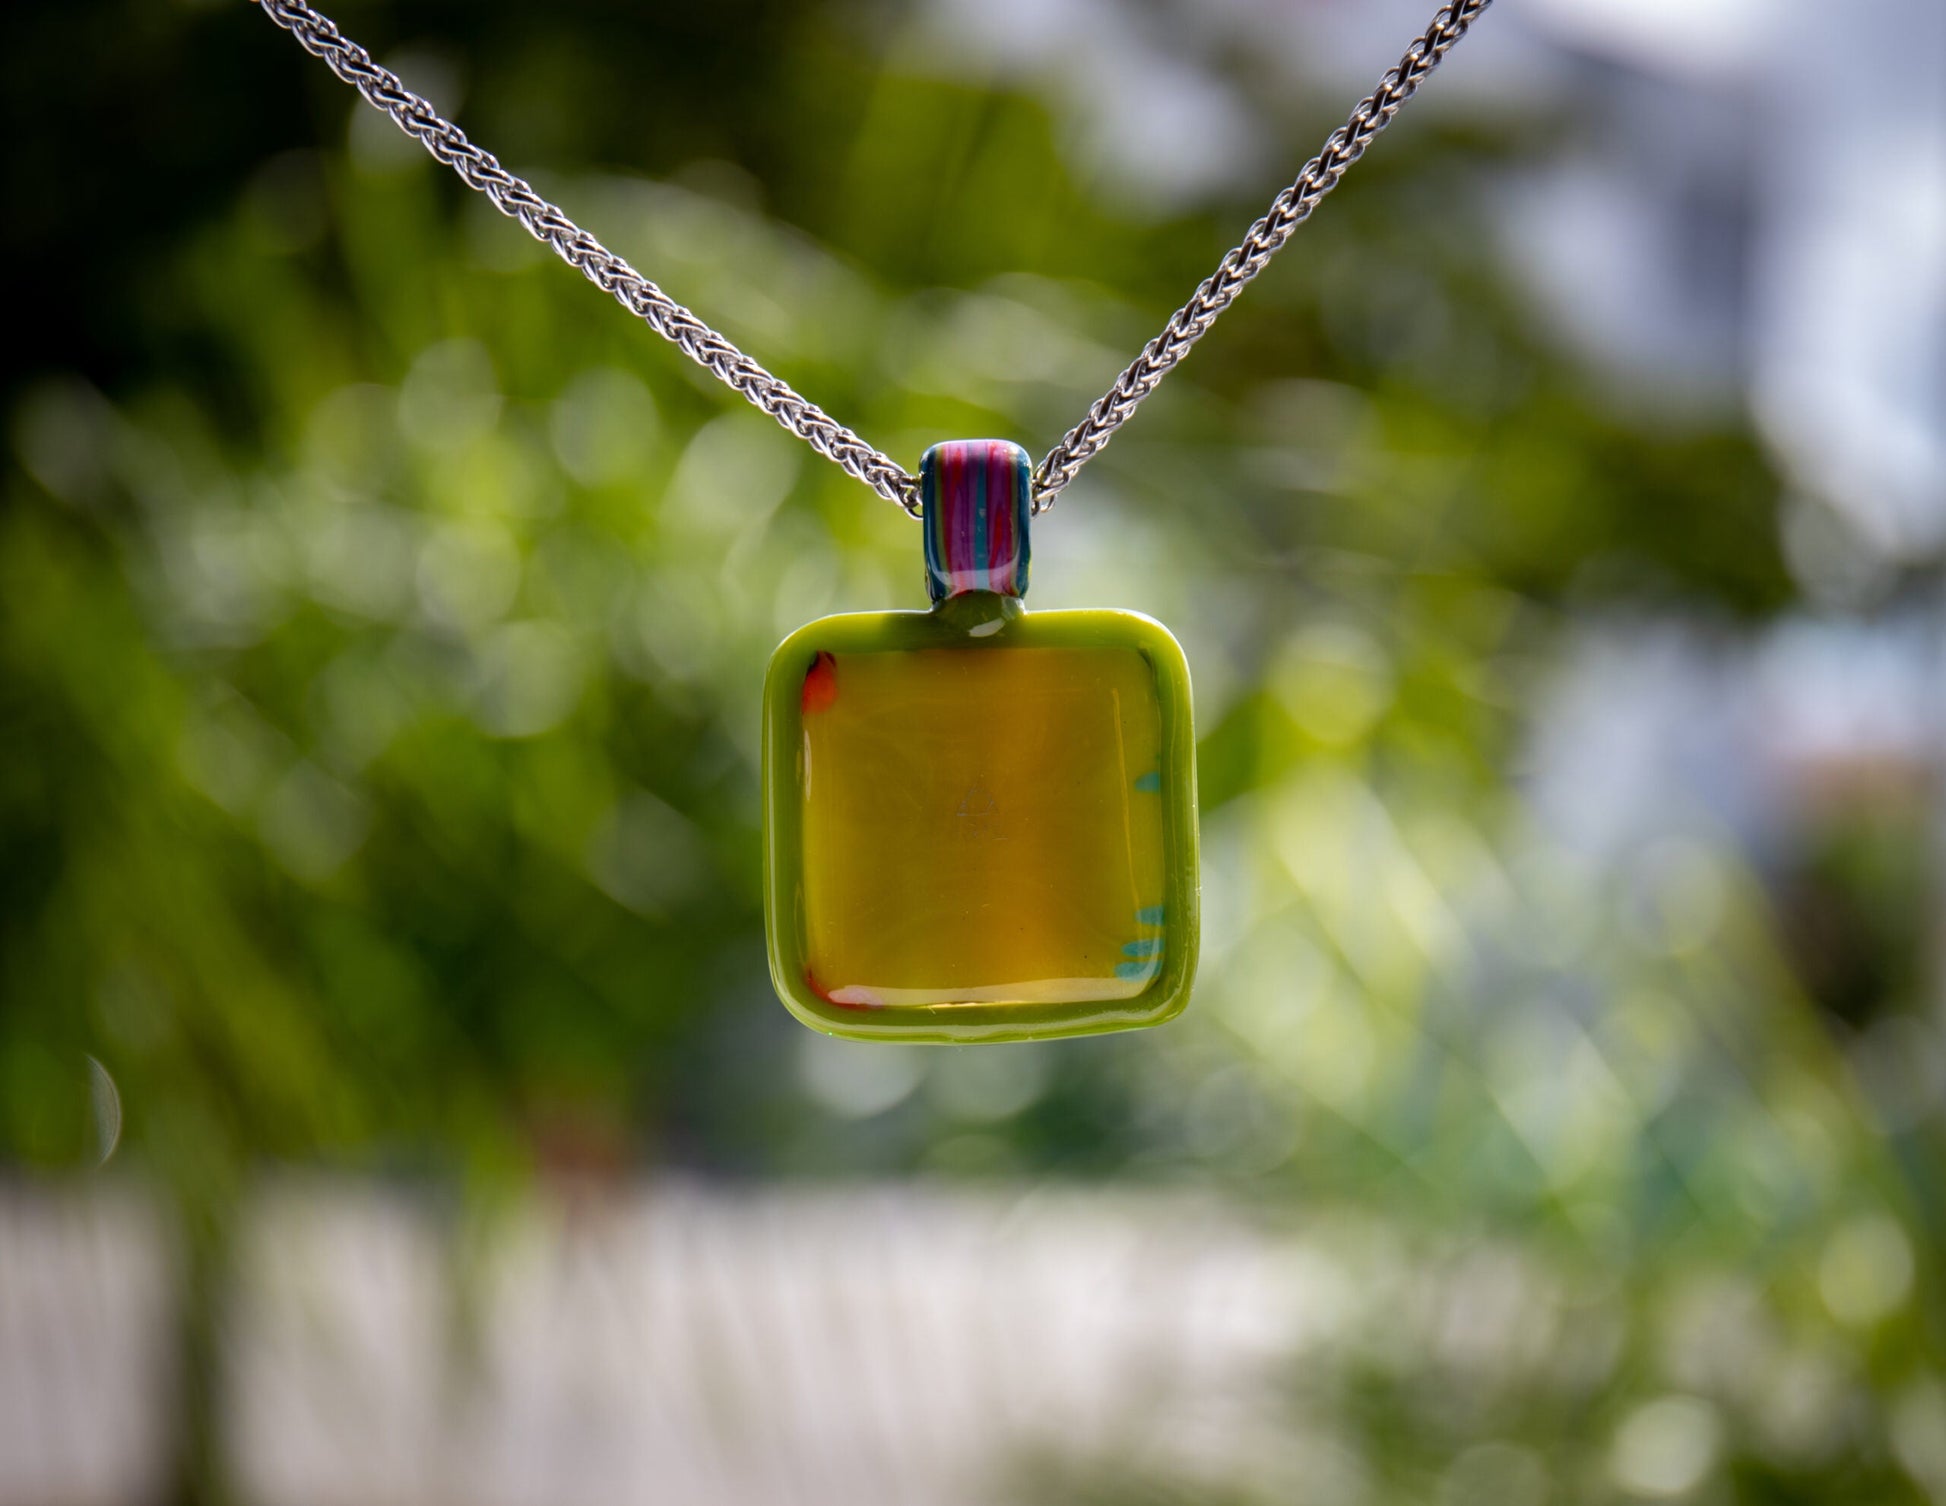 exquisite glass pendant - Zkittlez Pendant (B) by Trip A (Sweater Weather)